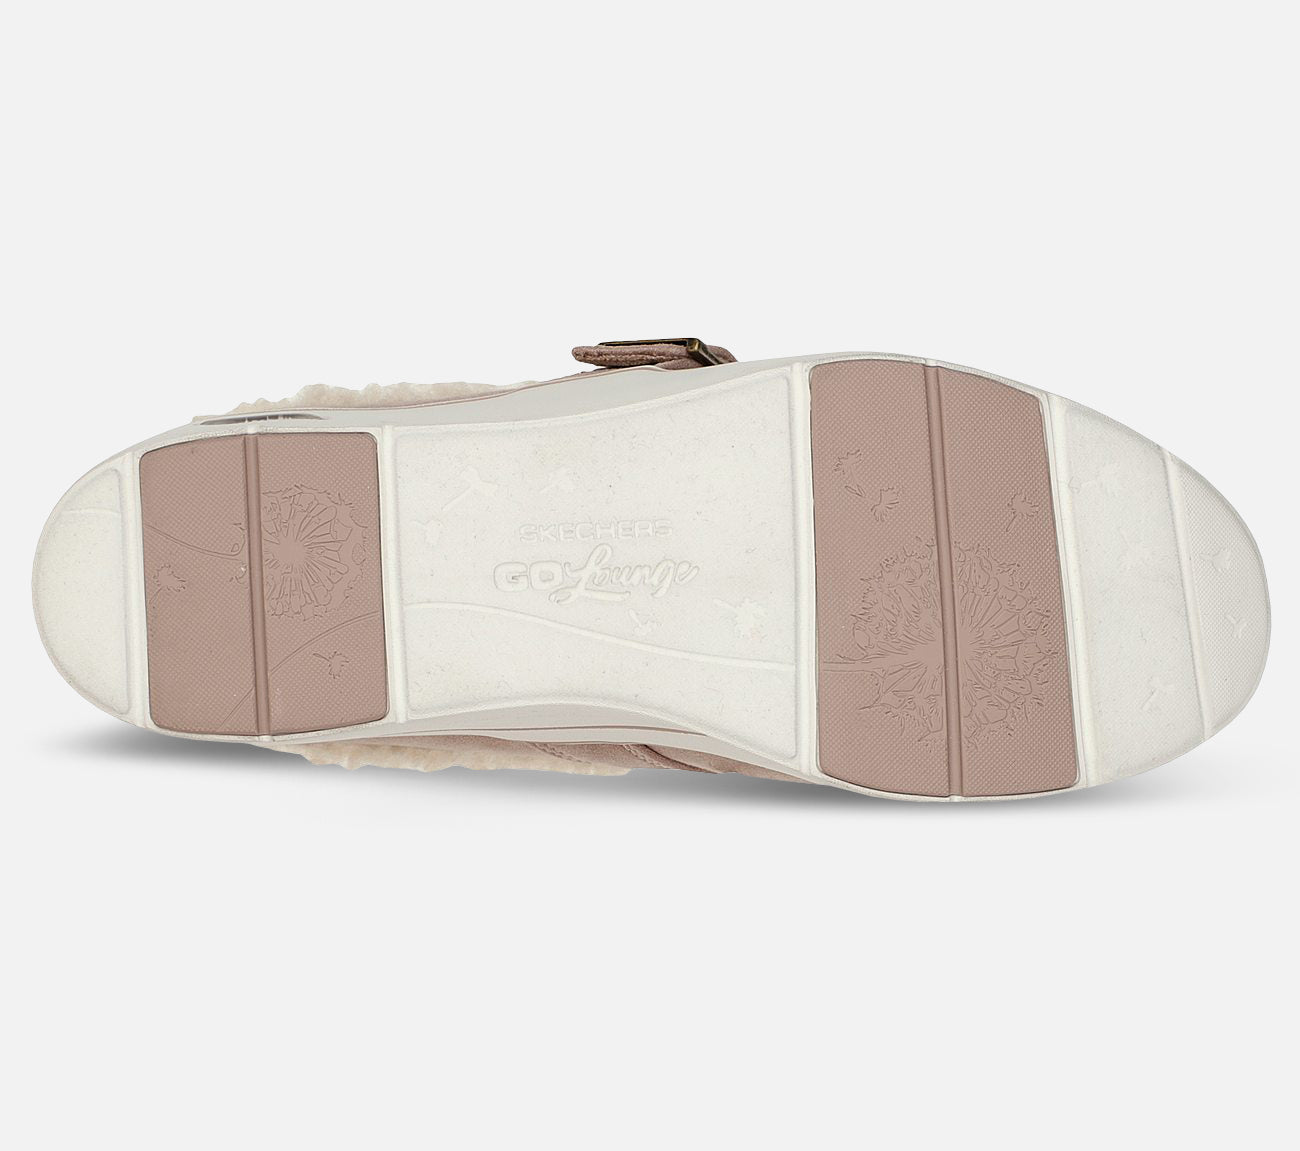 Arch Fit Lounge - Laid Back Slipper Skechers